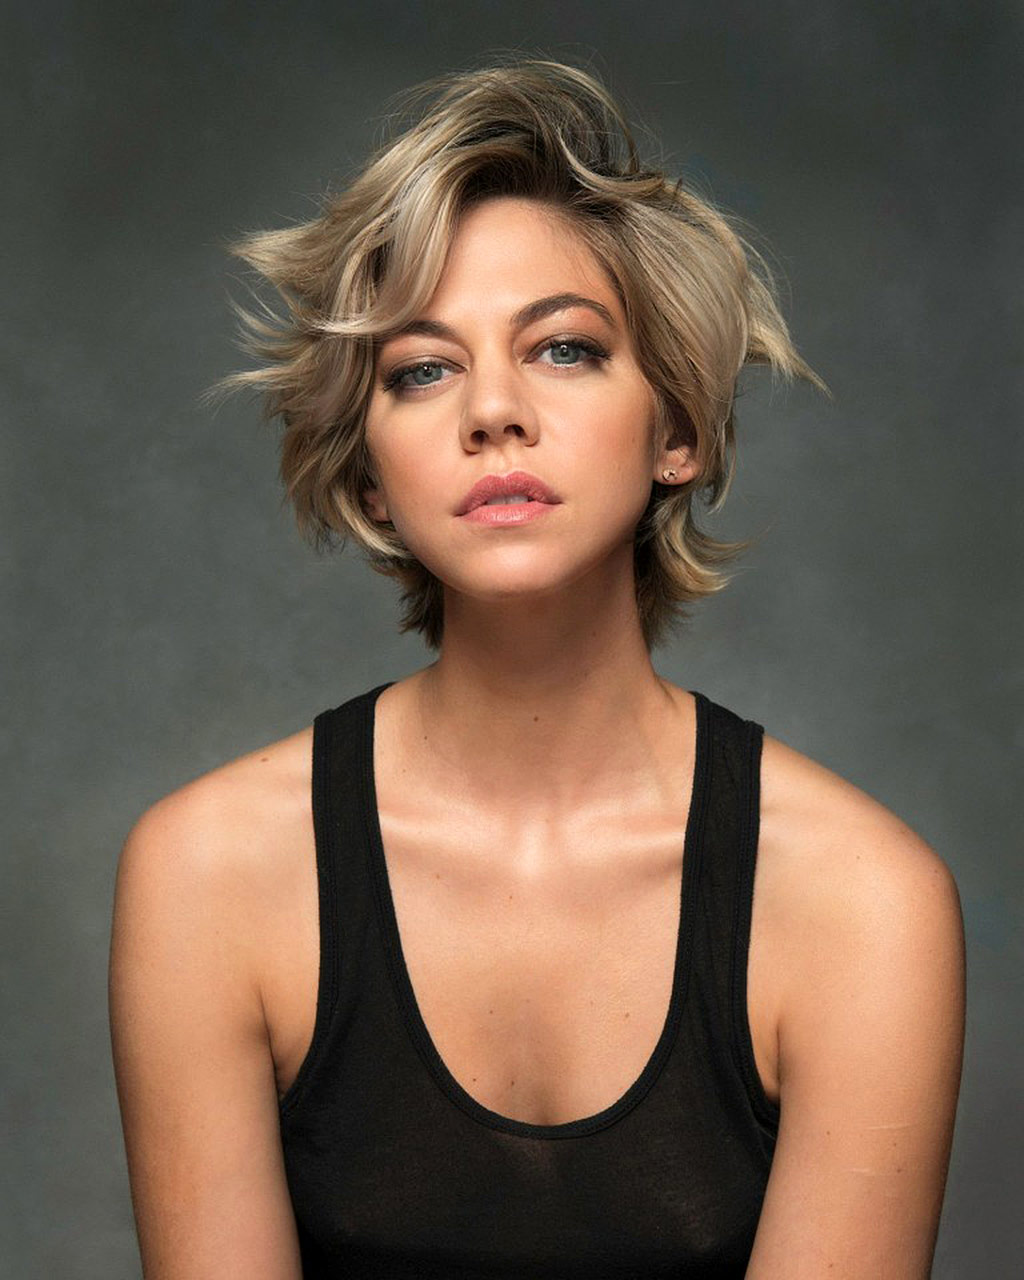 Analeigh Tipton Nude Private Photos — America S Next Top Model Showed